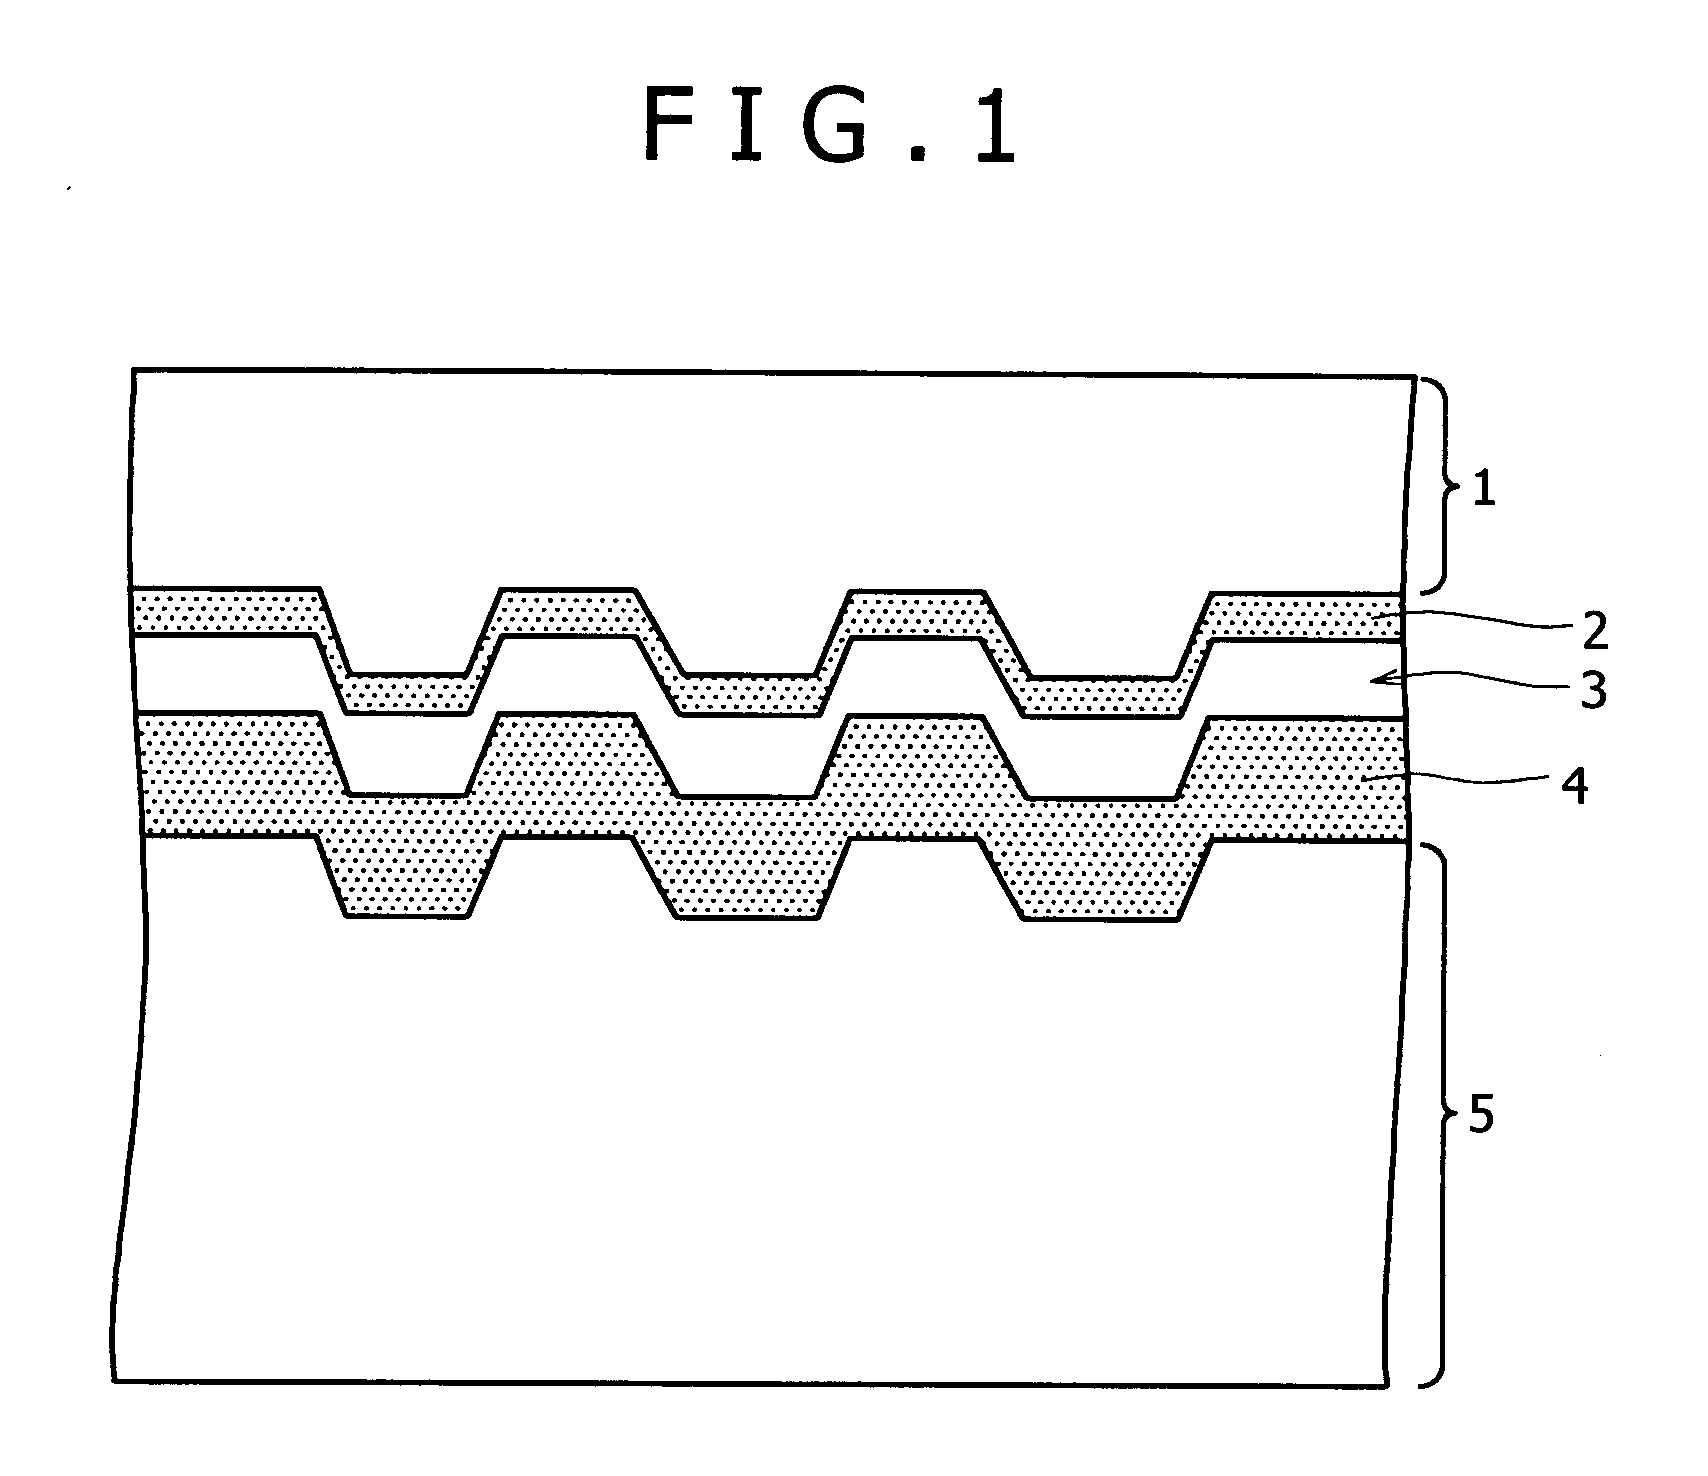 Ag alloy reflective layer for optical information recording medium, optical information recording medium, and sputtering target for forming ag alloy reflective layer for optical information recording medium